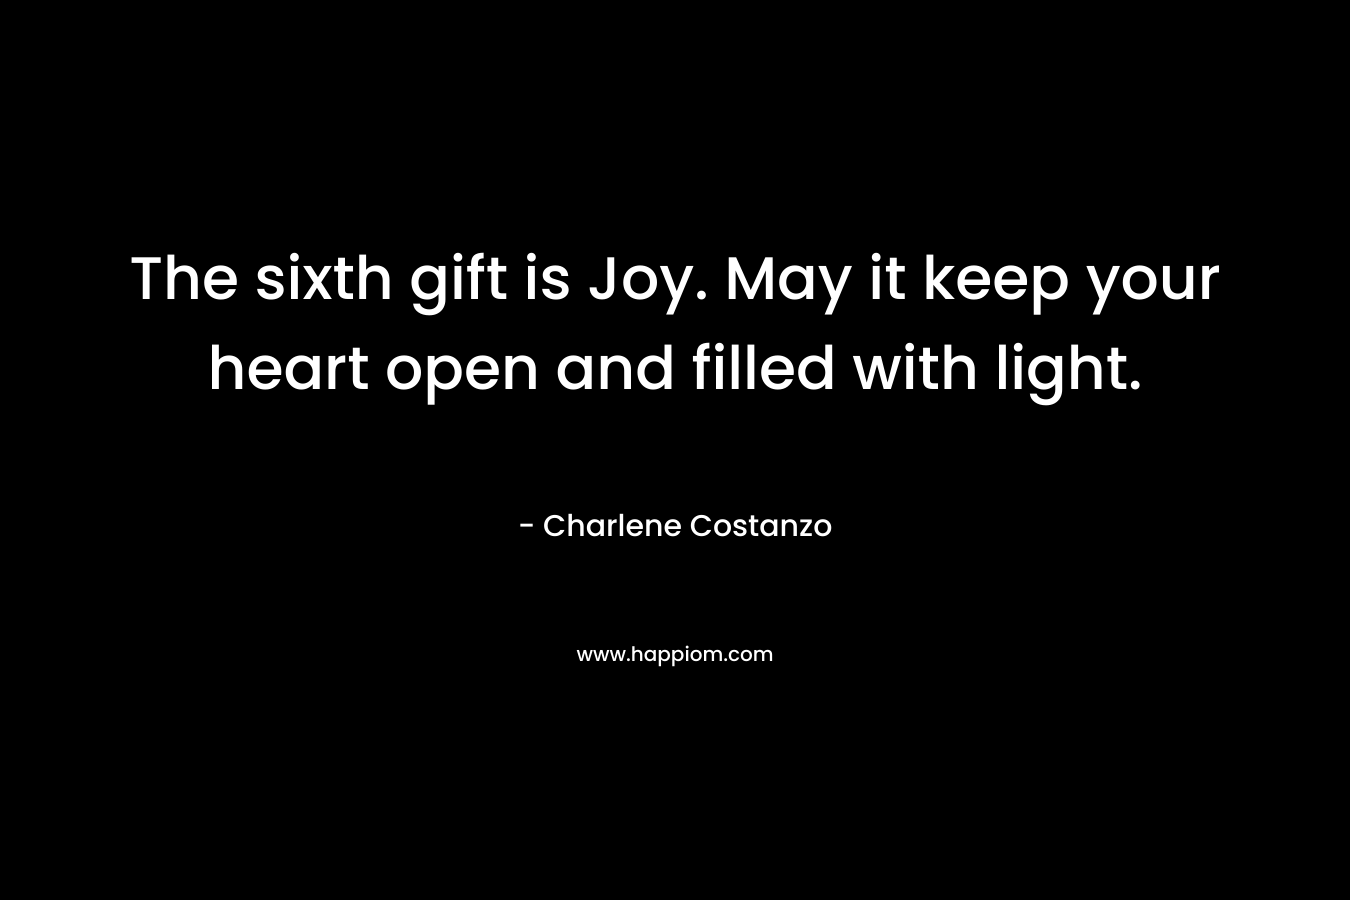 The sixth gift is Joy. May it keep your heart open and filled with light. – Charlene Costanzo